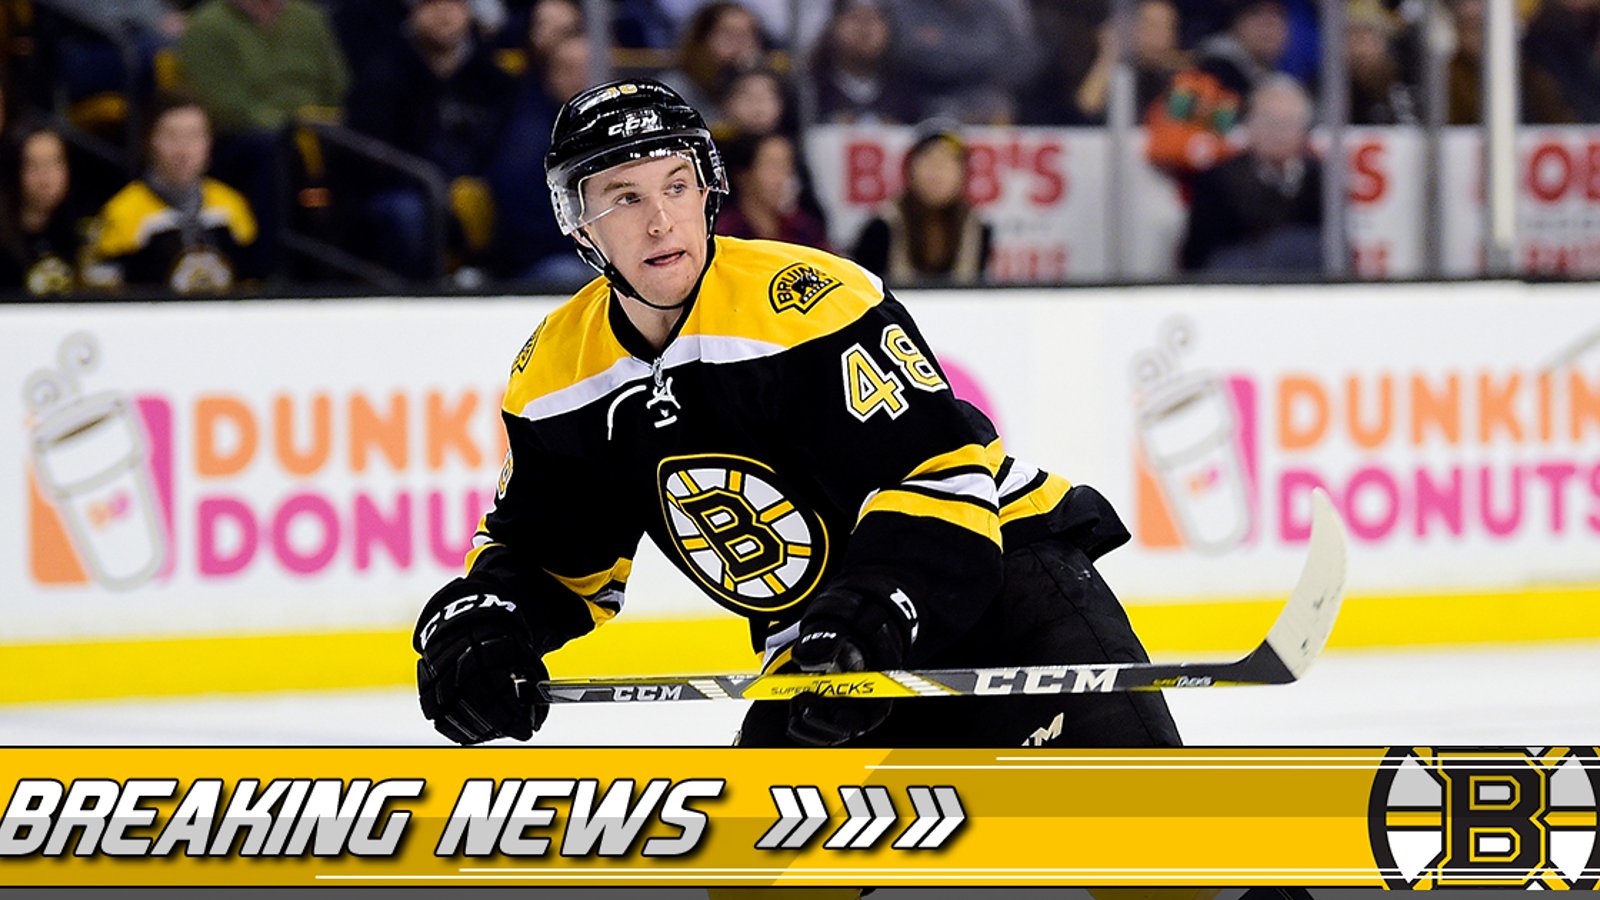 Breaking: Boston announce a roster move